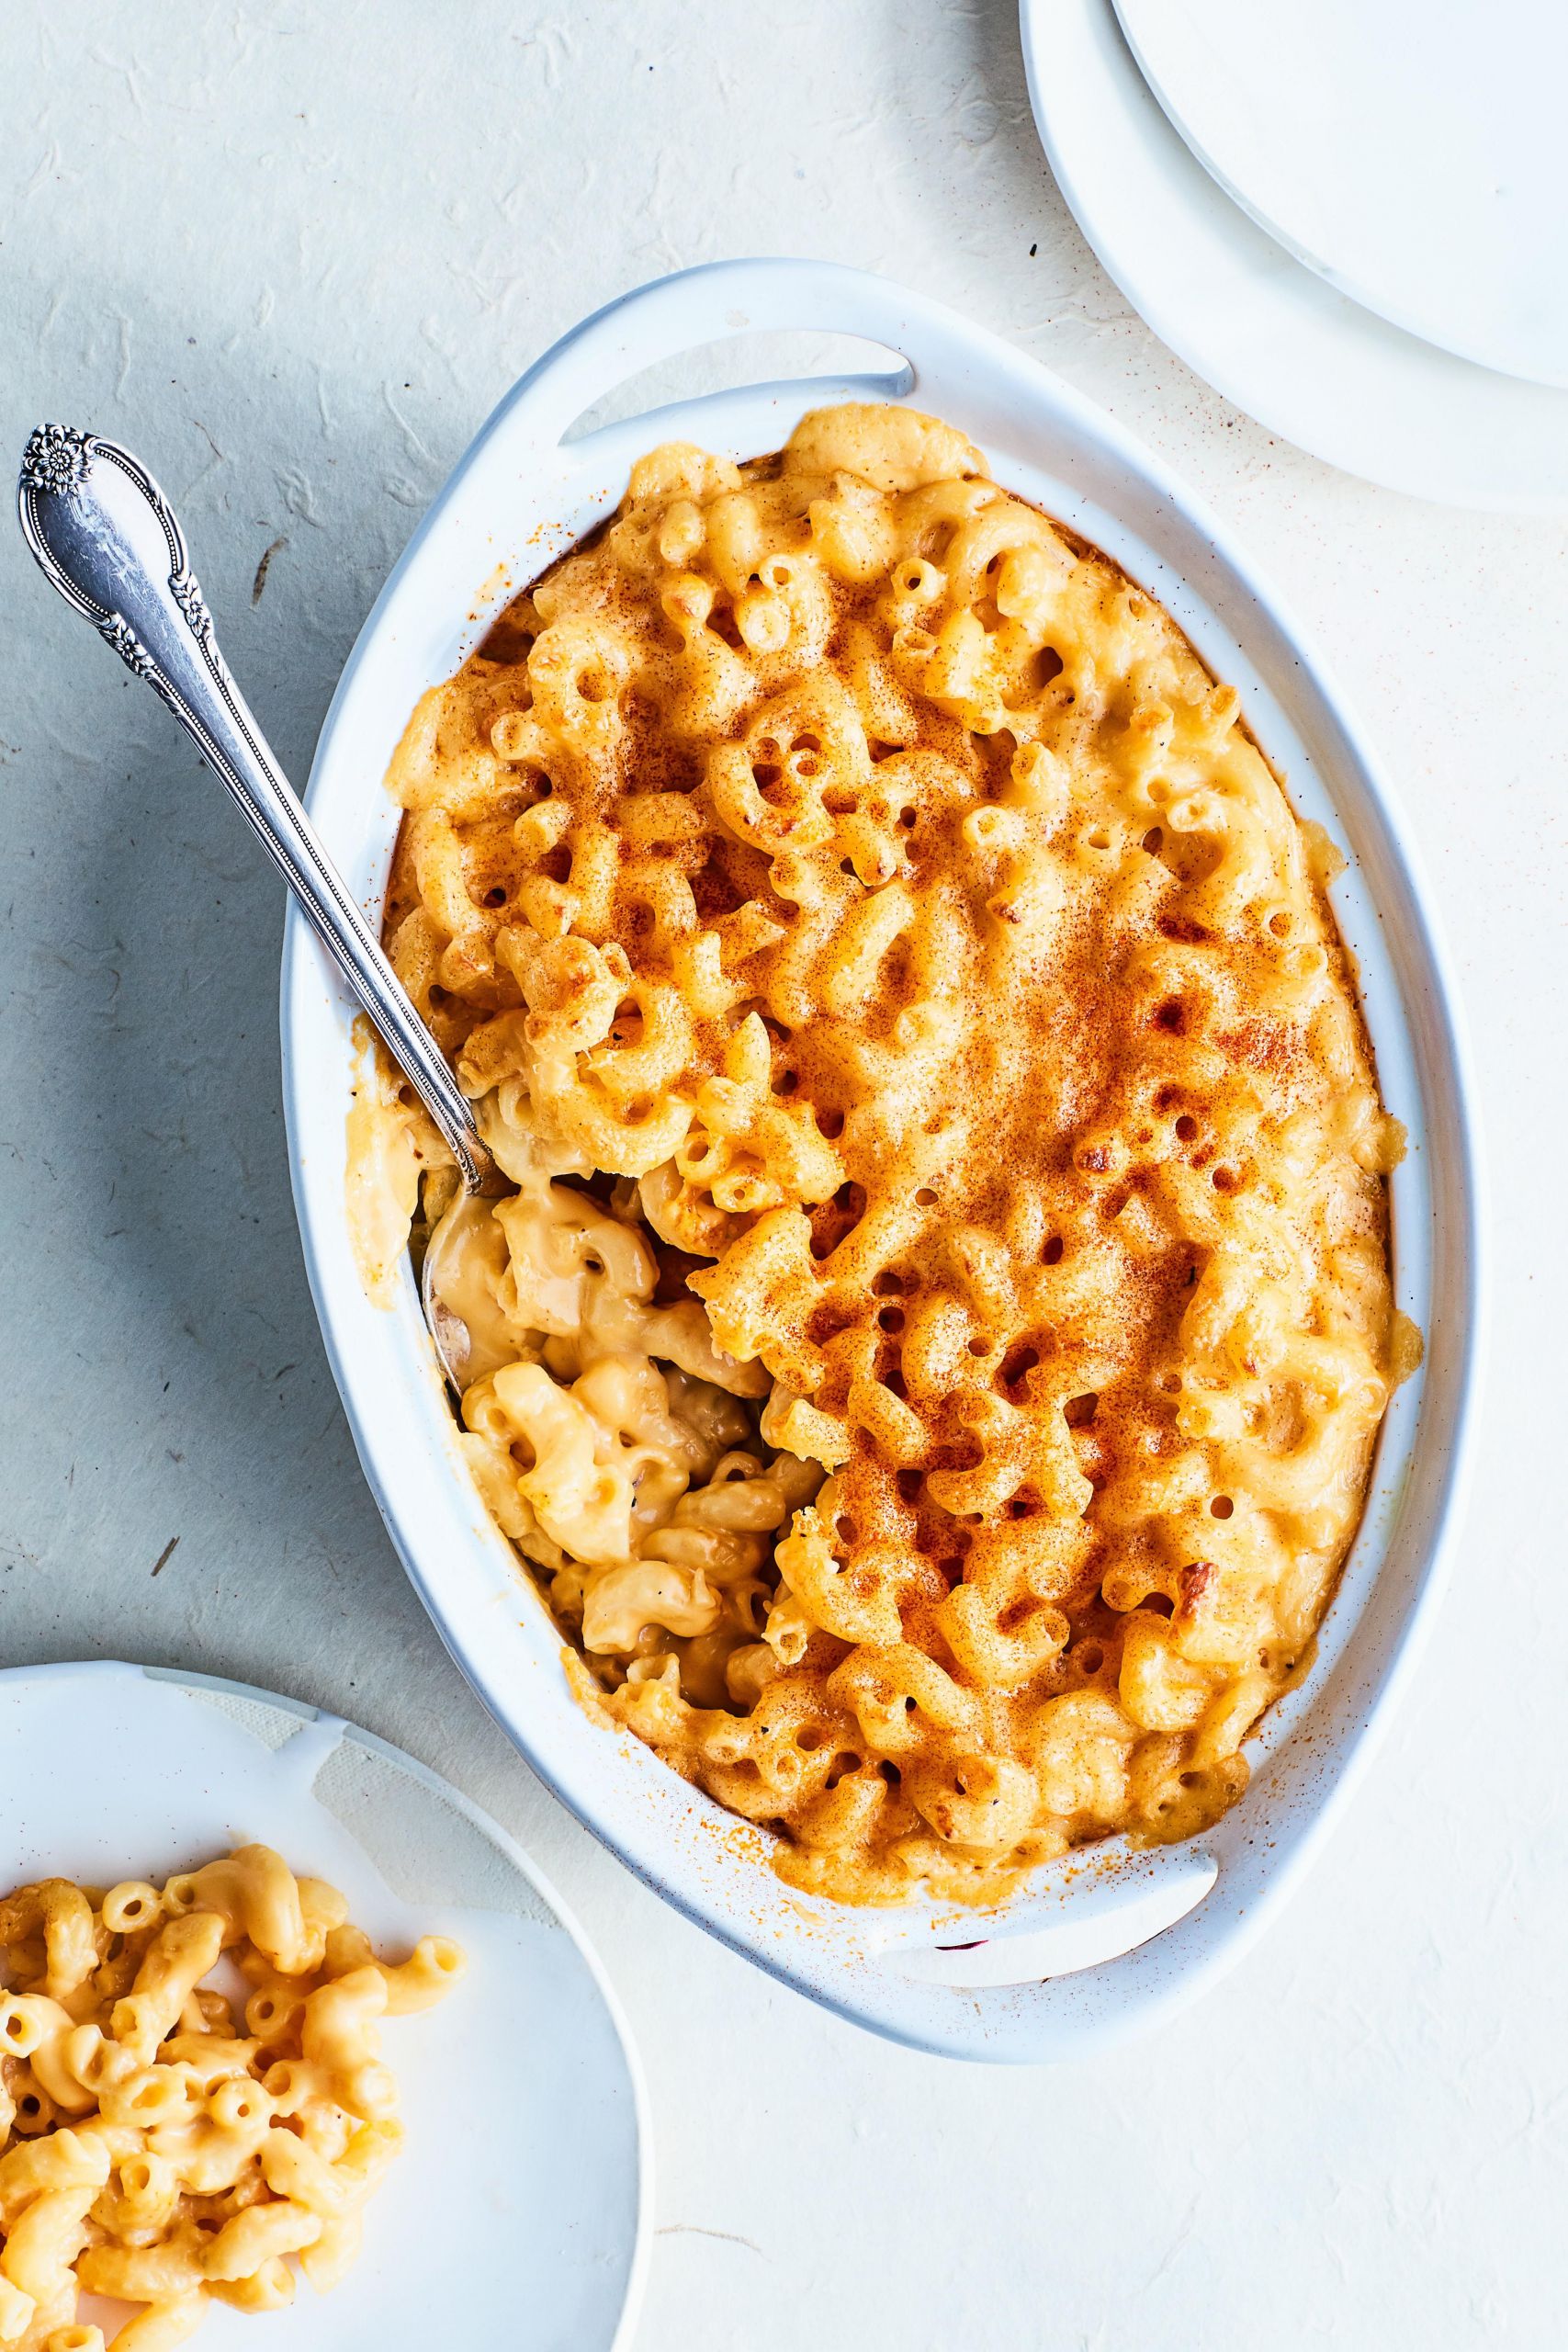 Baked Macaroni And Cheese Evaporated Milk
 Macaroni & Cheese for a Crowd Recipe in 2020